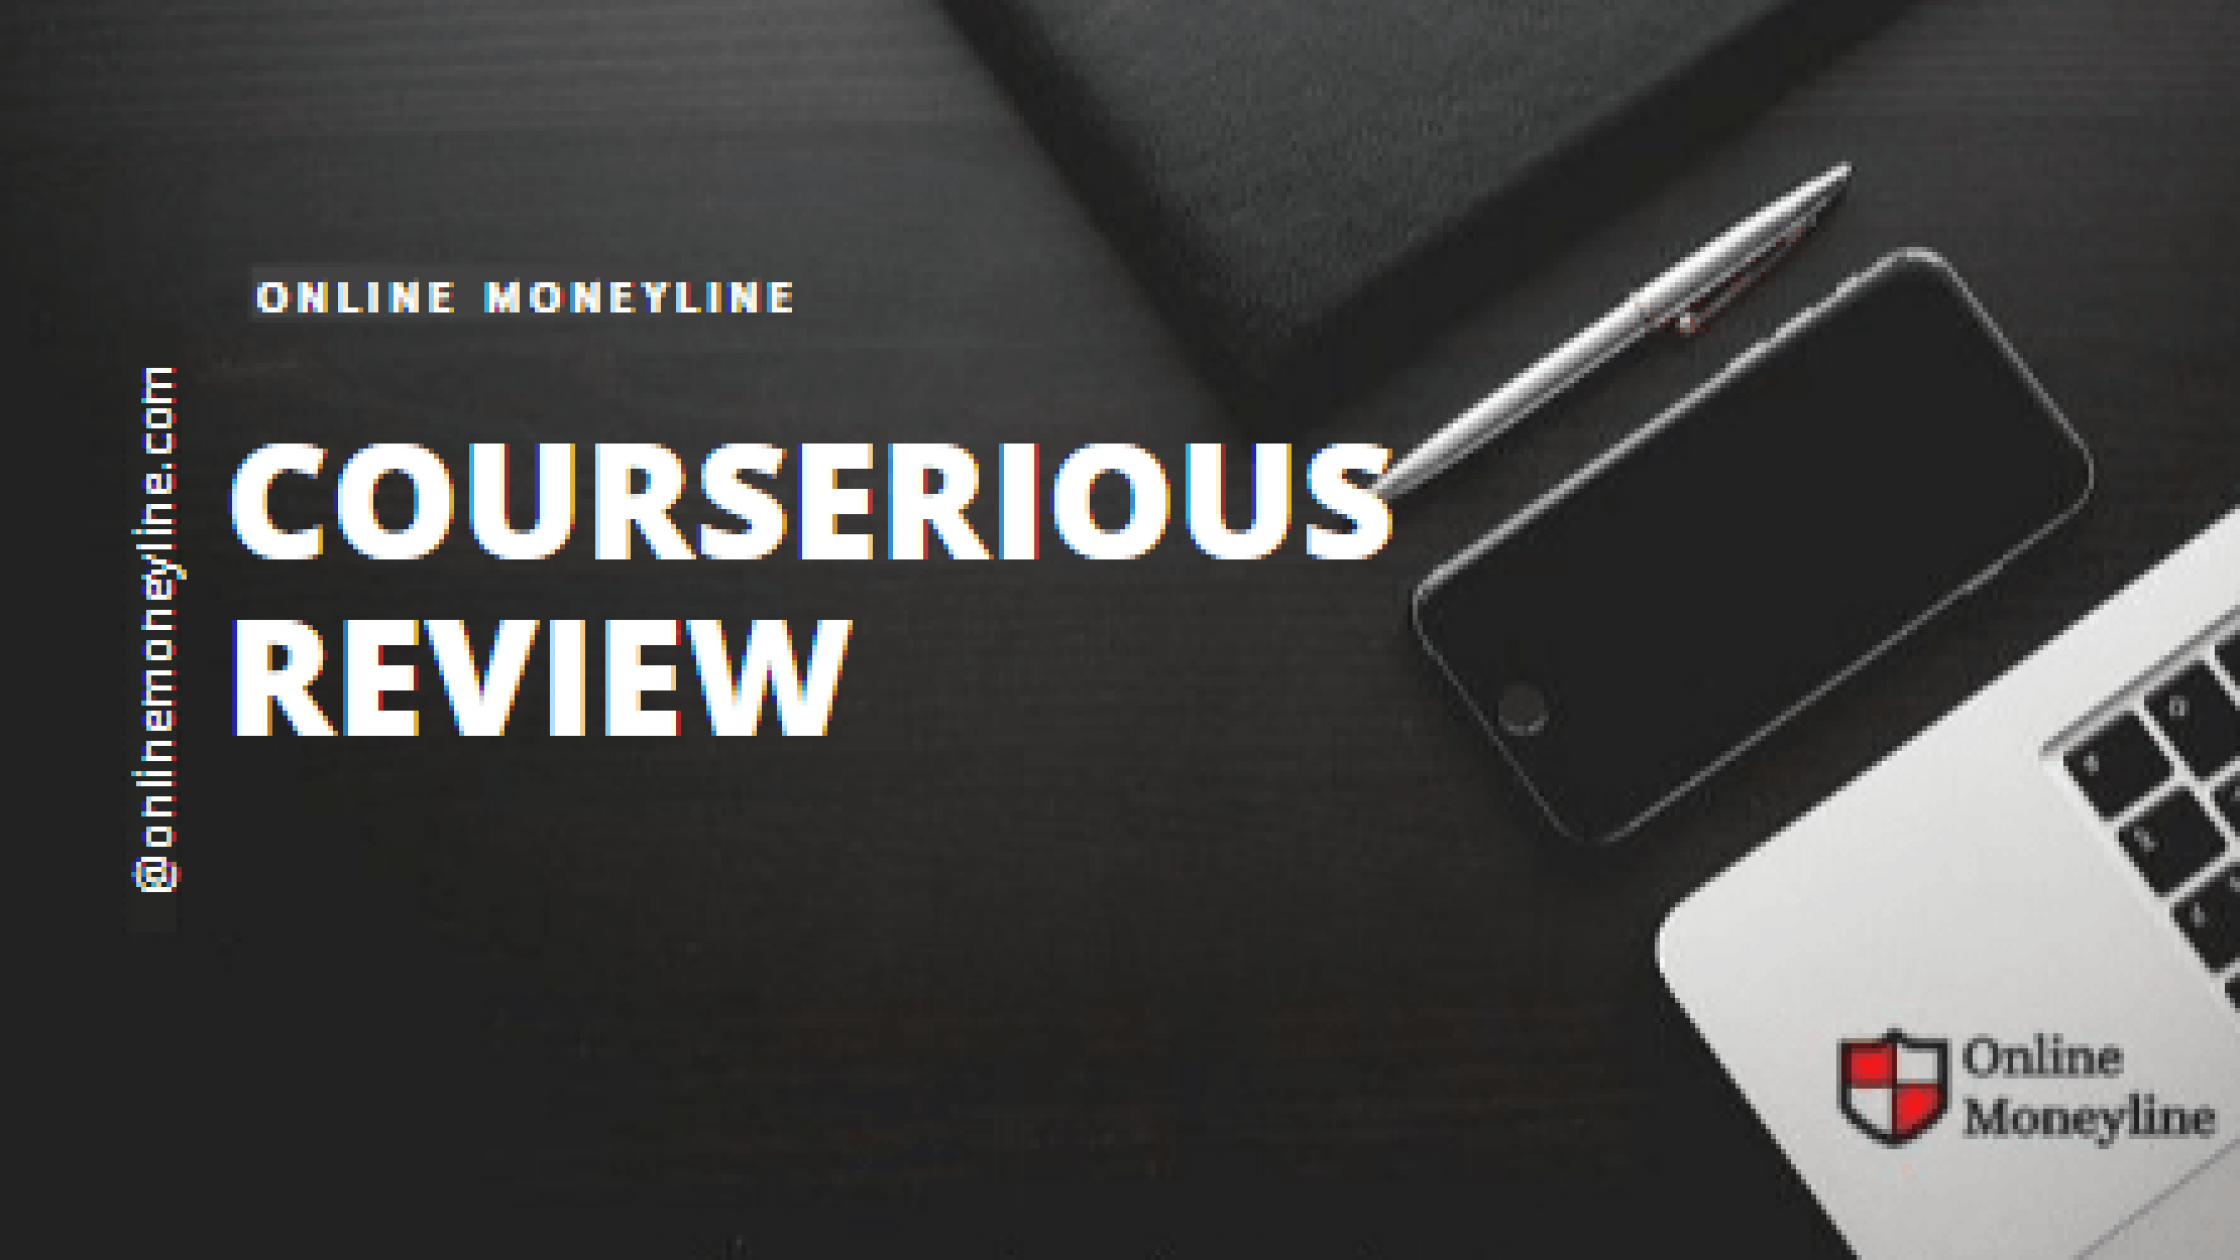 Courserious Review 